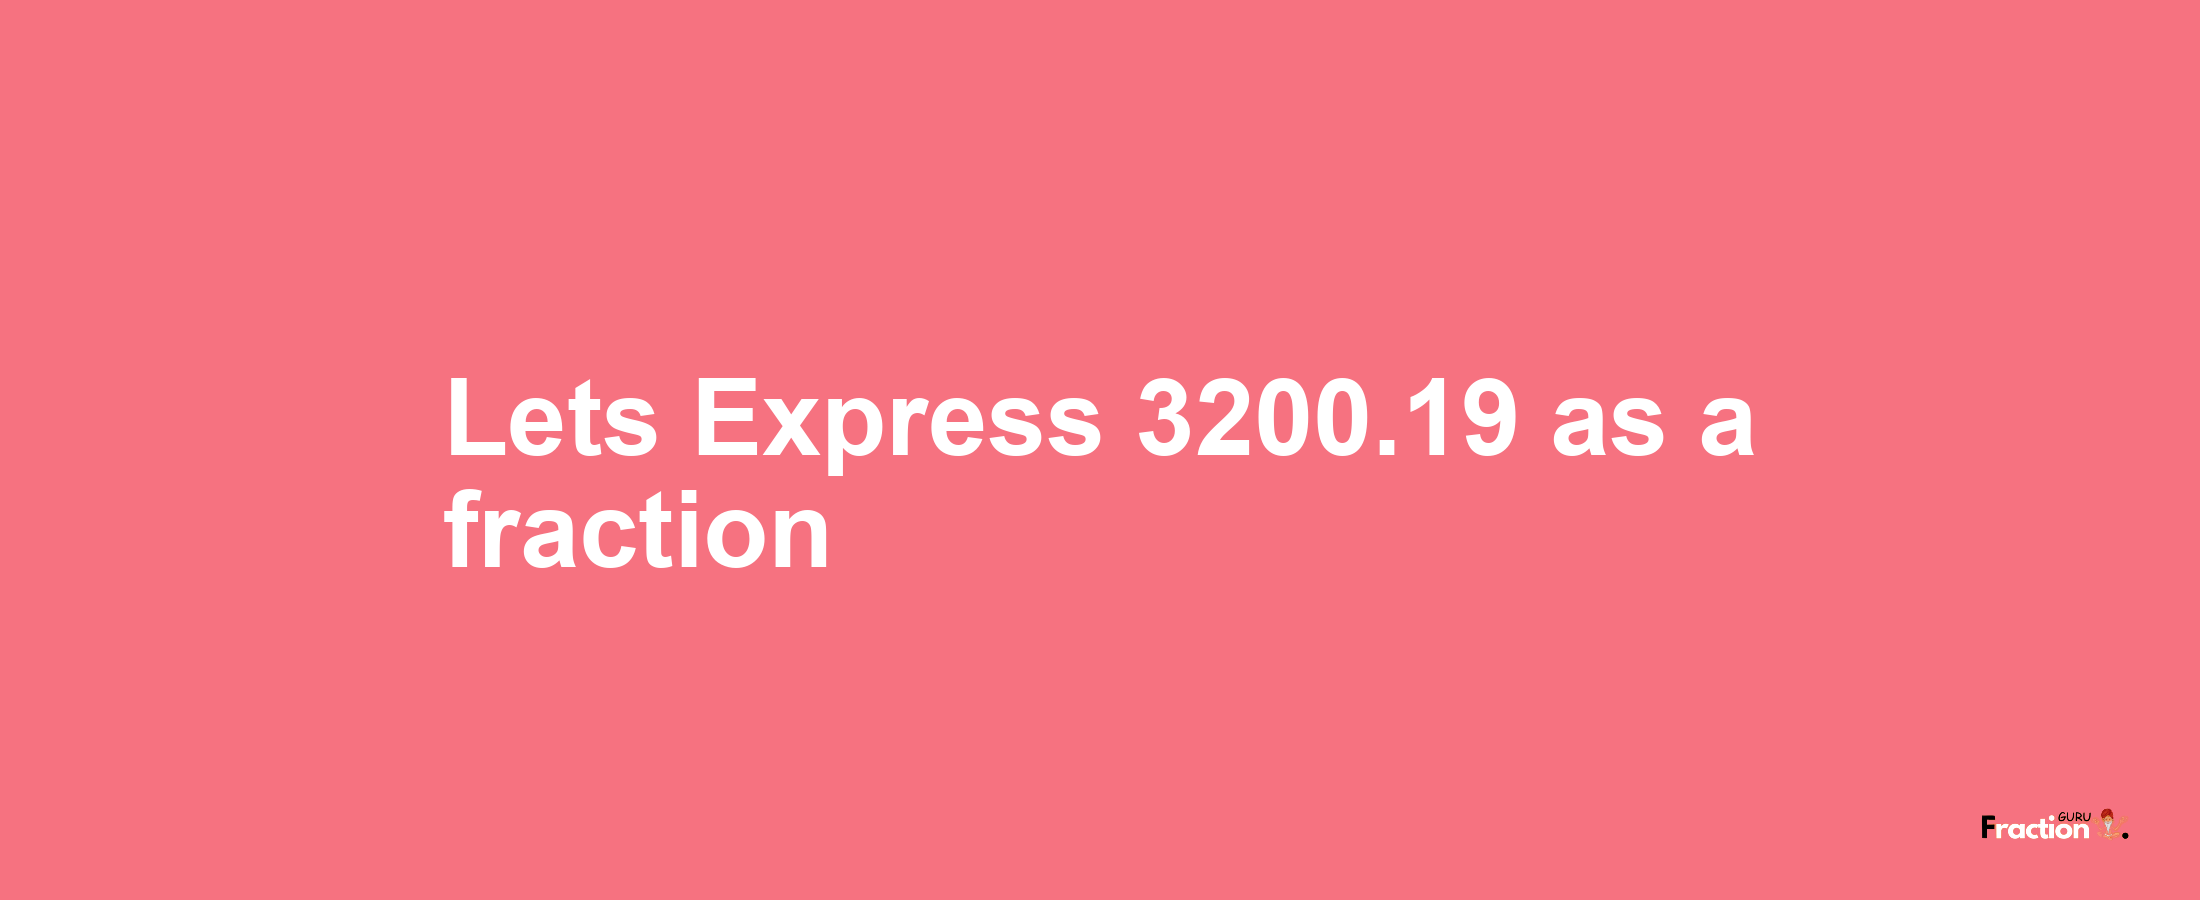 Lets Express 3200.19 as afraction